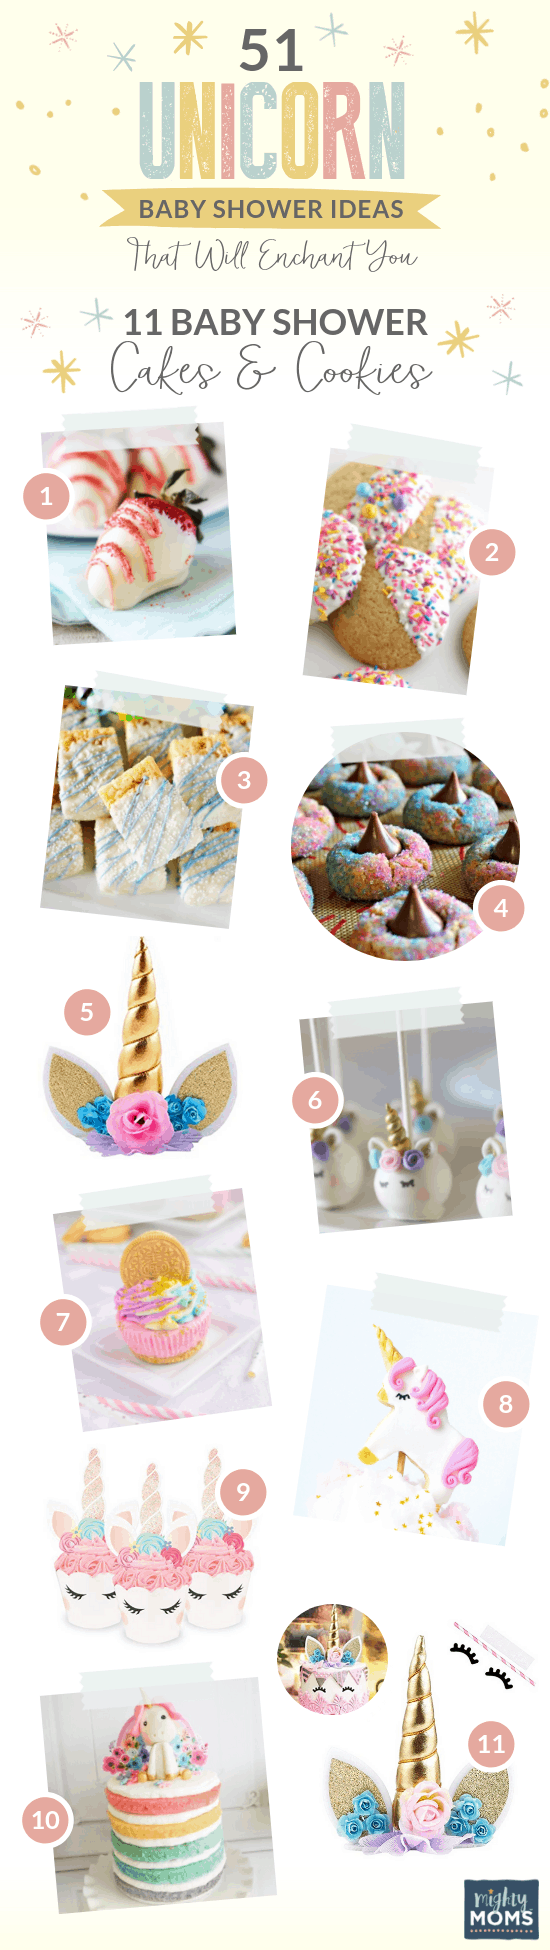 10 Bewitching Unicorn Baby Shower Bakes - MightyMoms.club